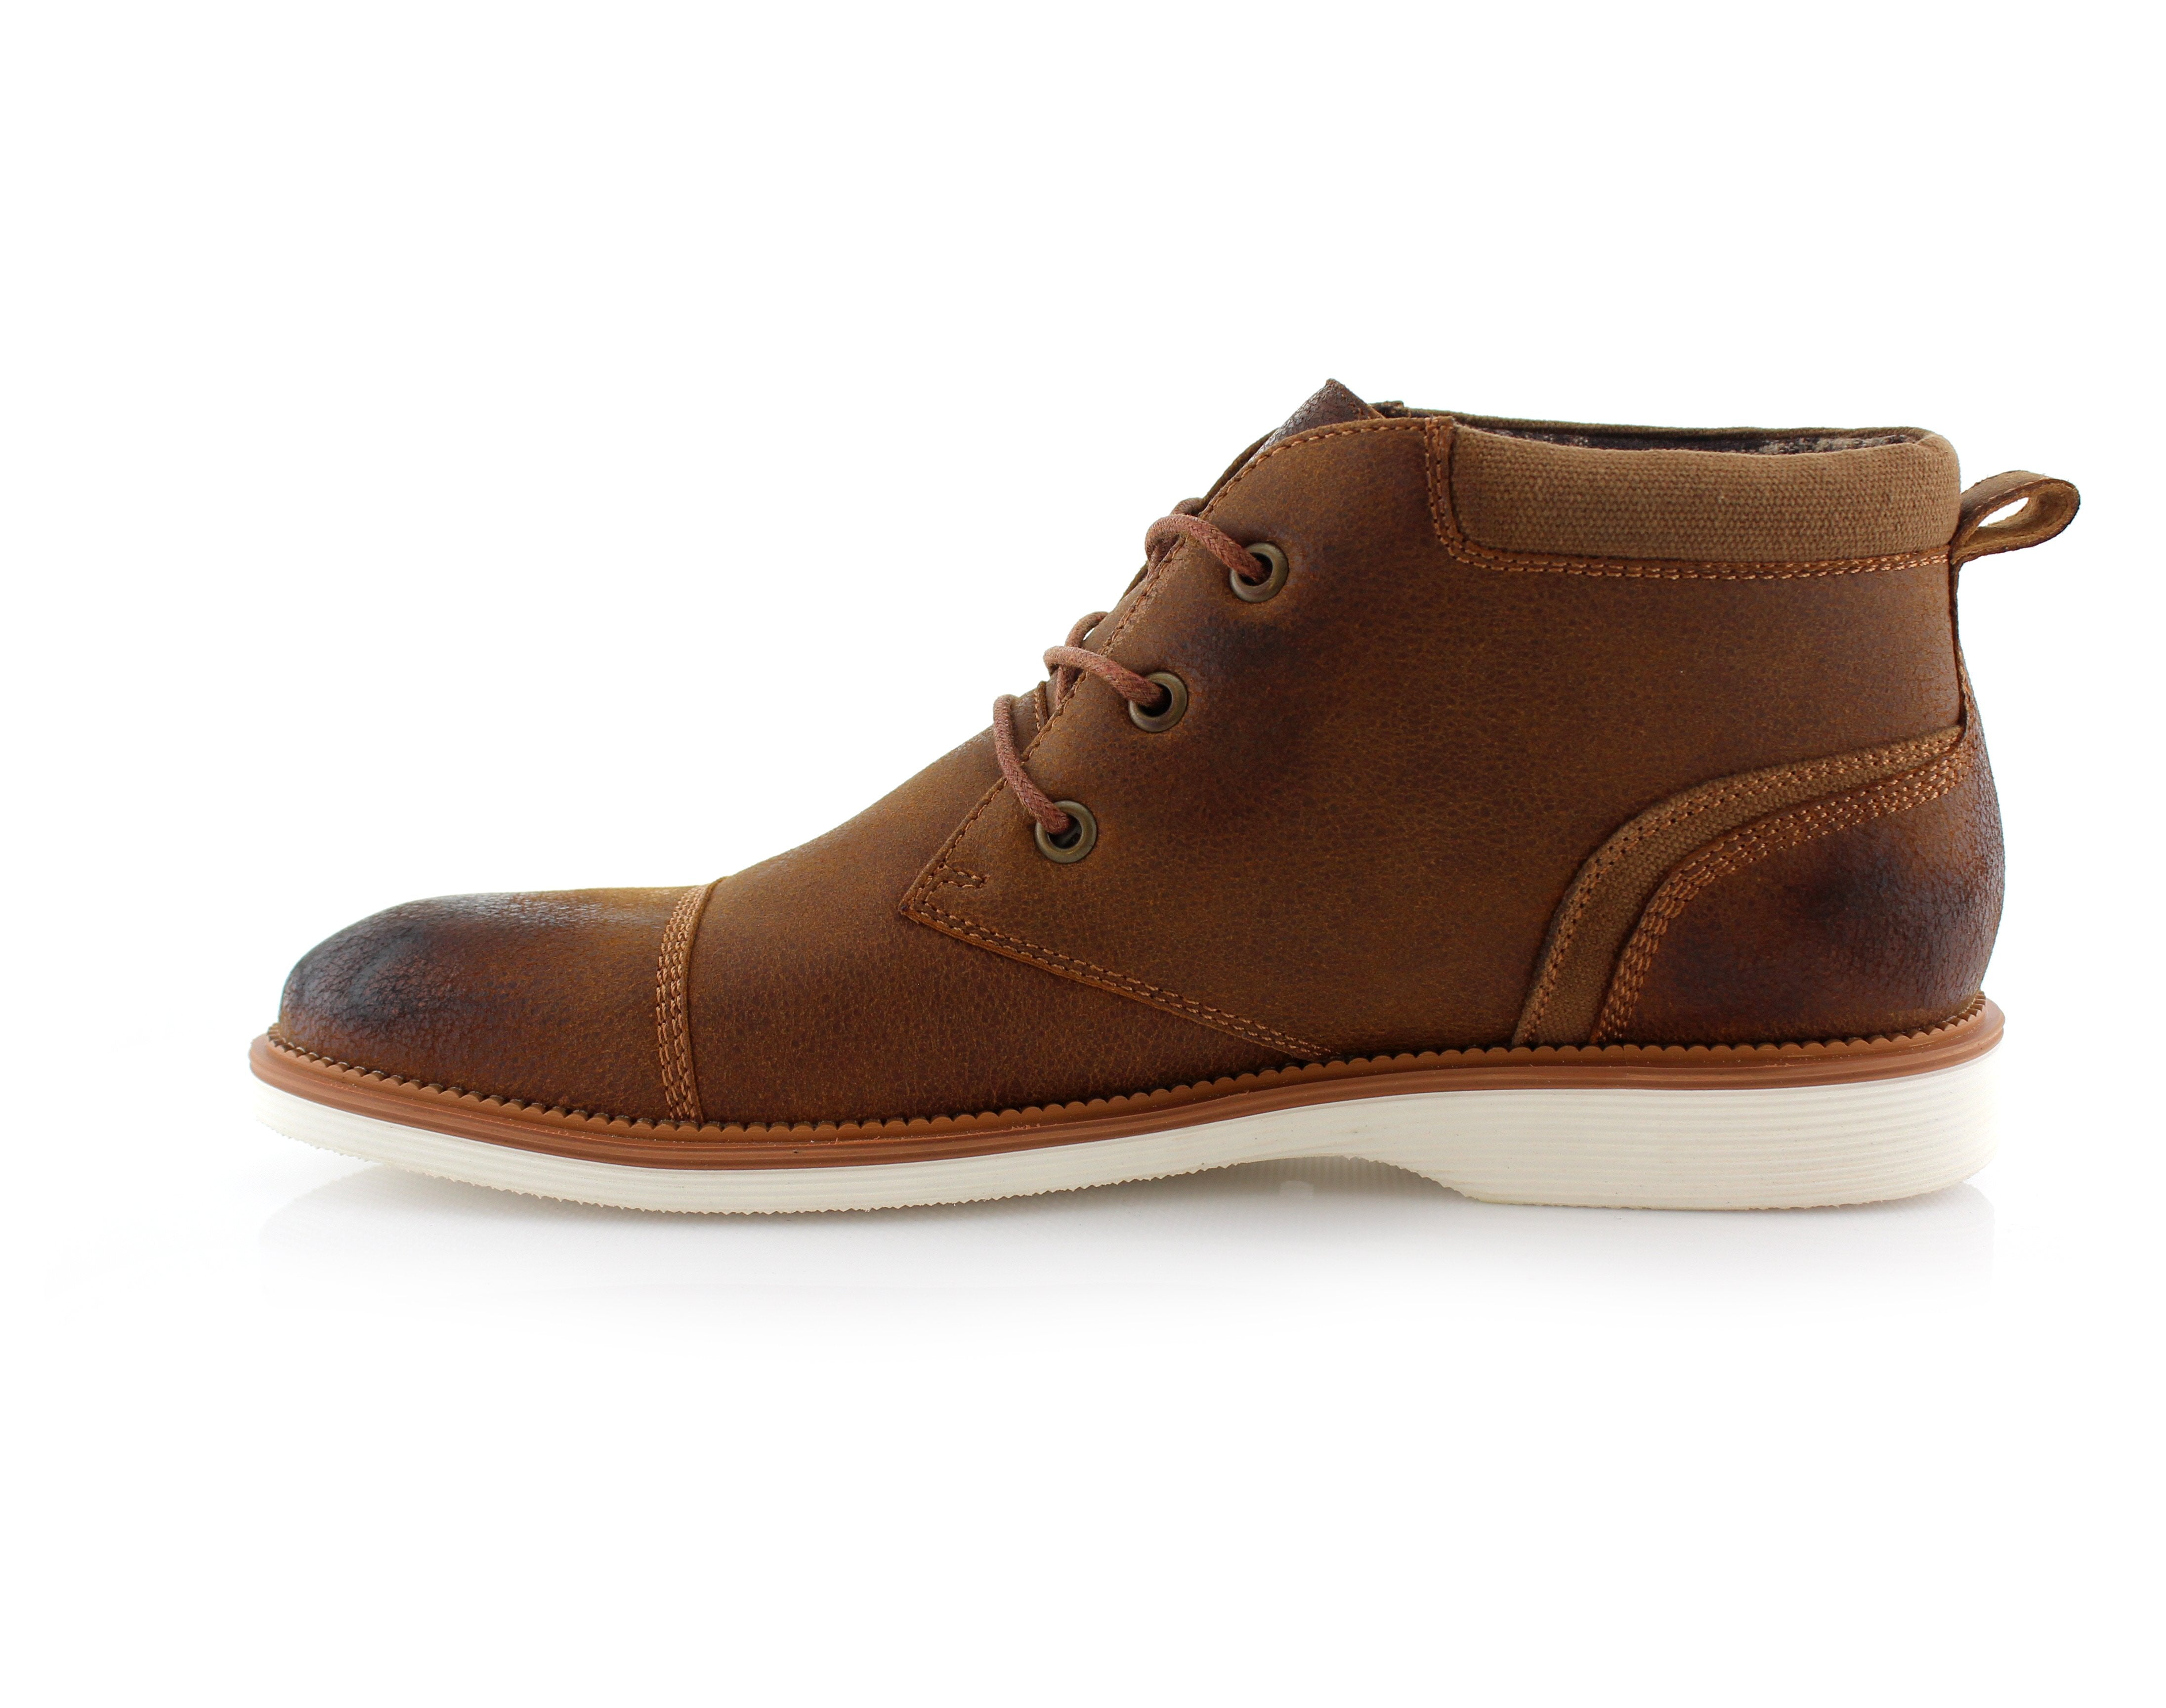 Burnished Cap-Toe Chukka Boots | Sammy by Ferro Aldo | Conal Footwear | Inner Side Angle View